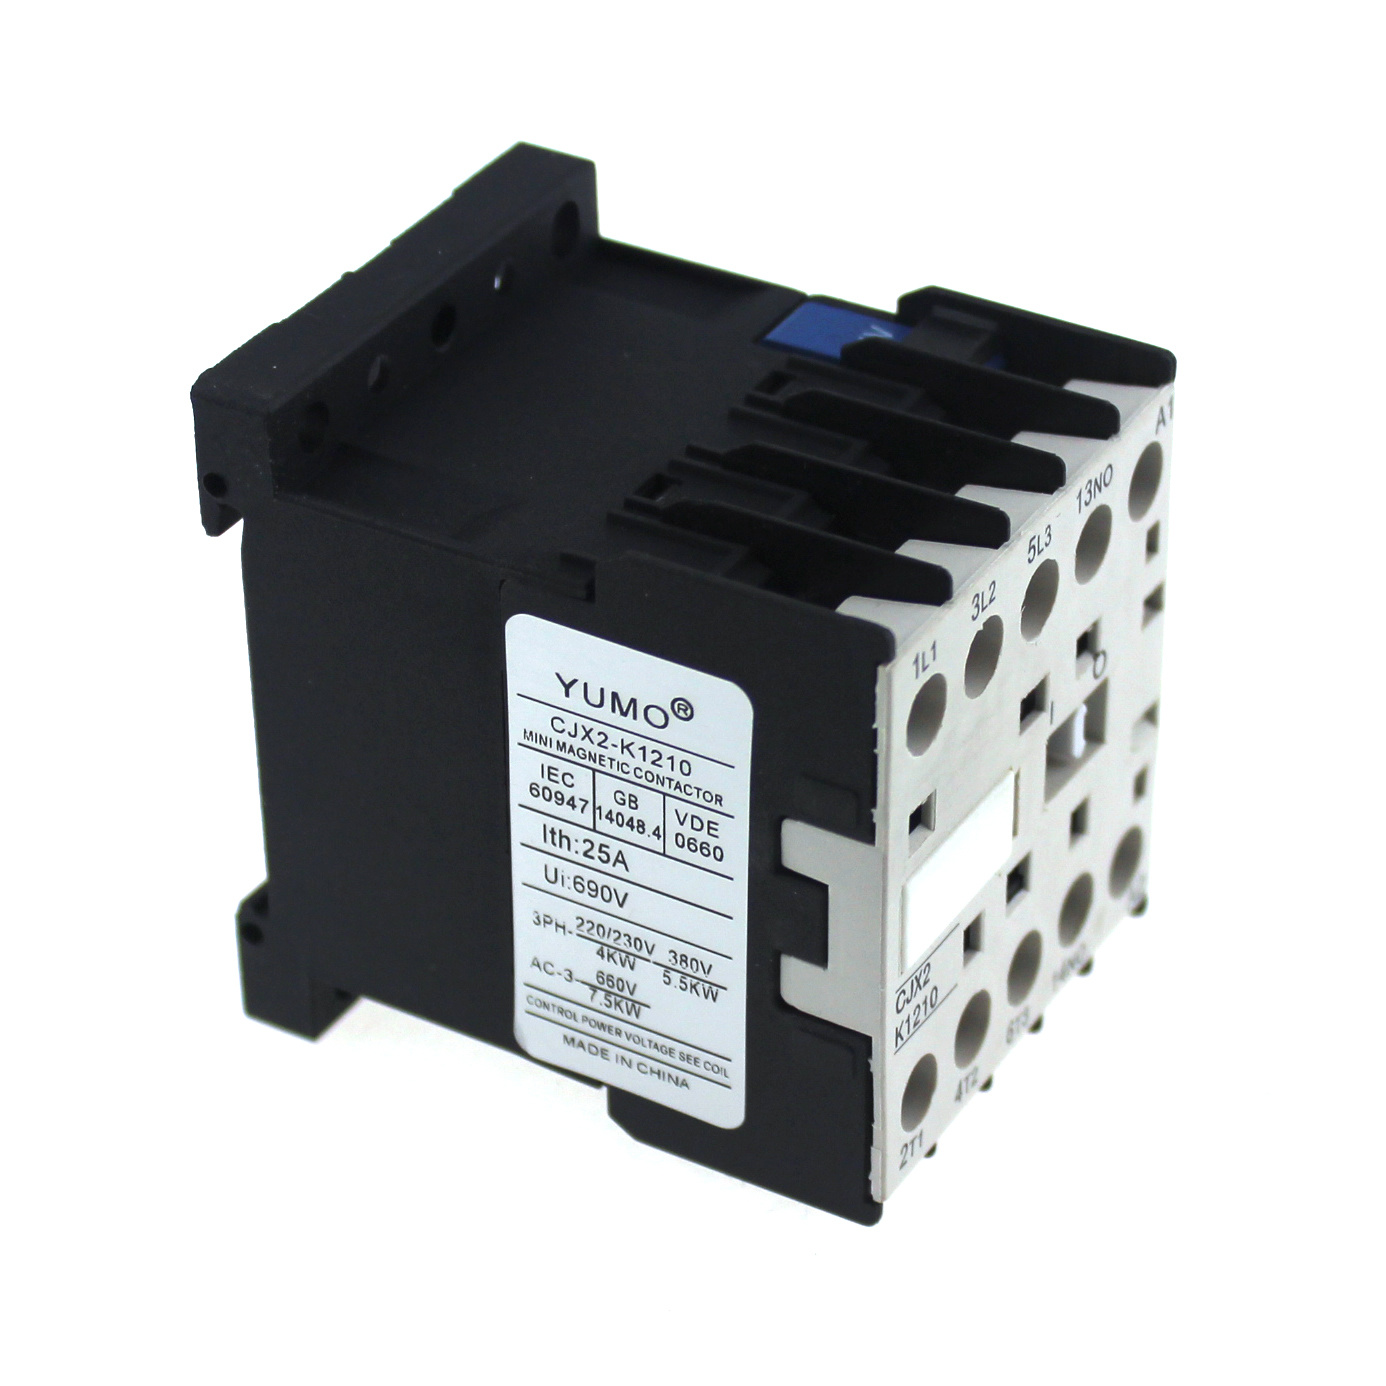 Yumo Hot Sale Cjx2-K1210 AC Magnetic Contactor